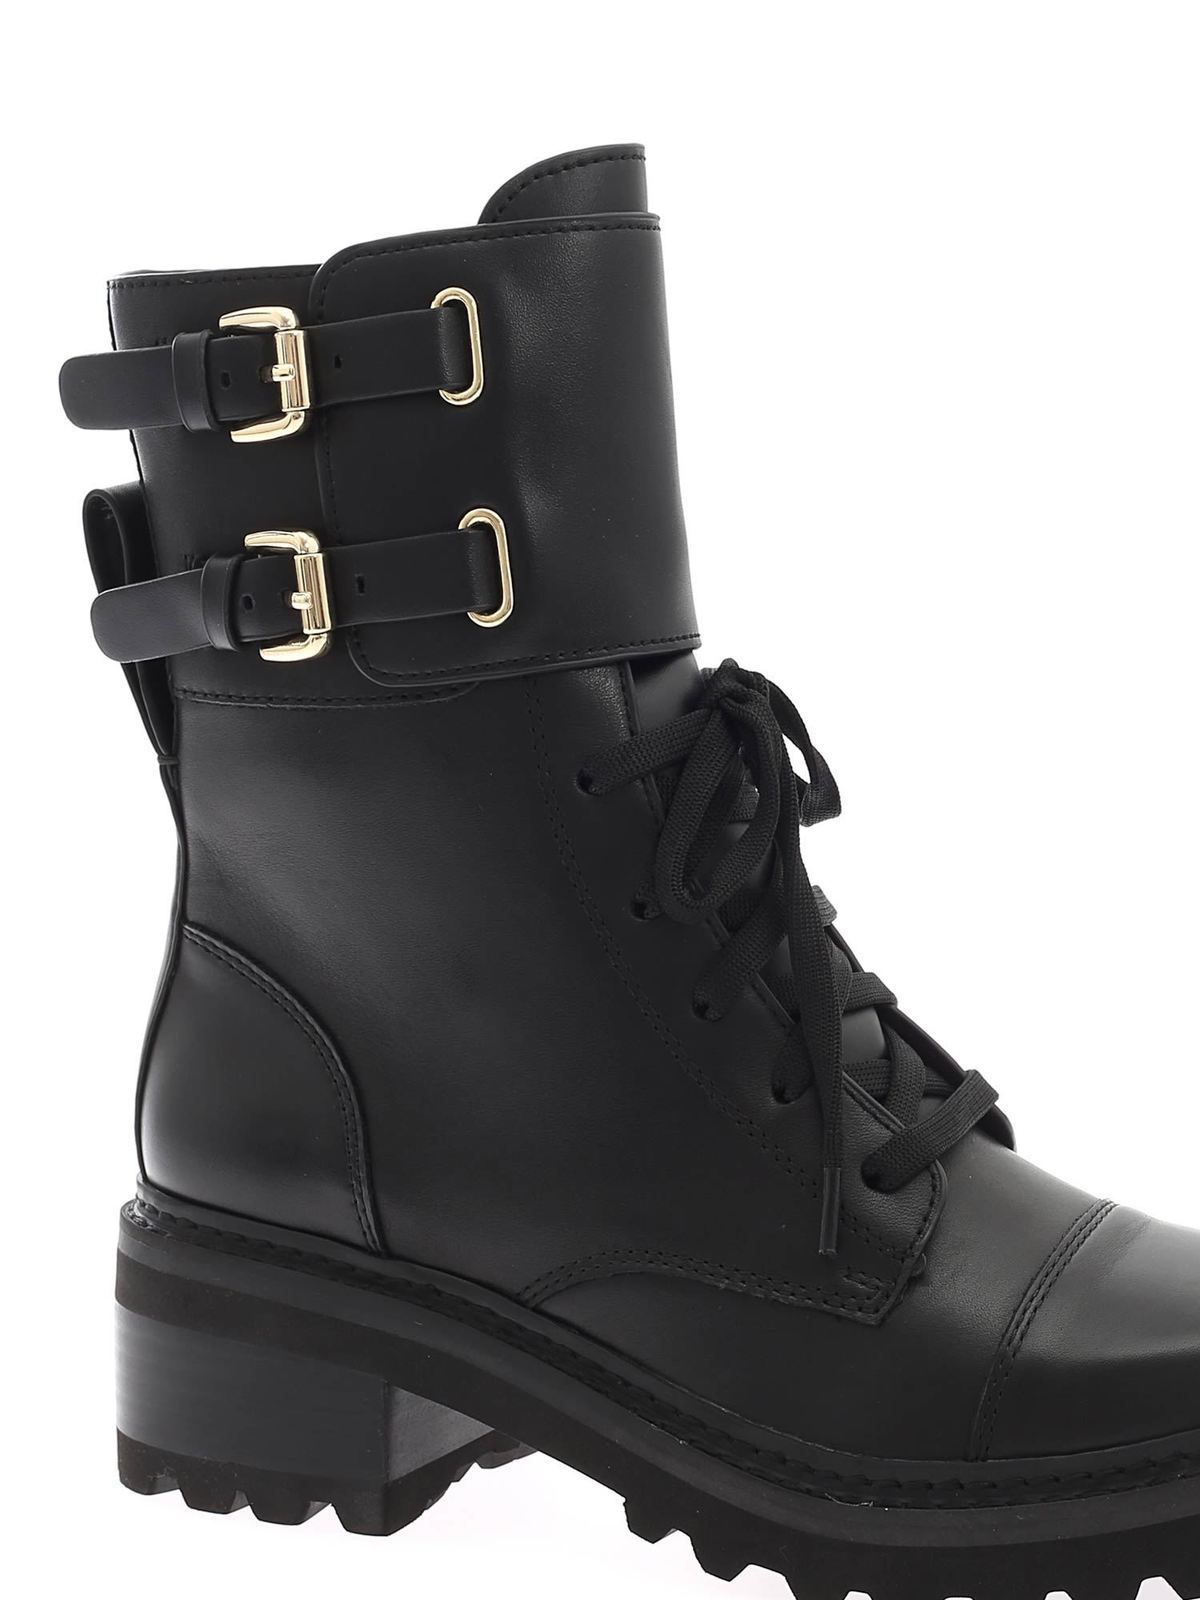 Ankle boots Dkny - Combat ankle boots in black - K3052117SMOOTHCALFBLACKBLK